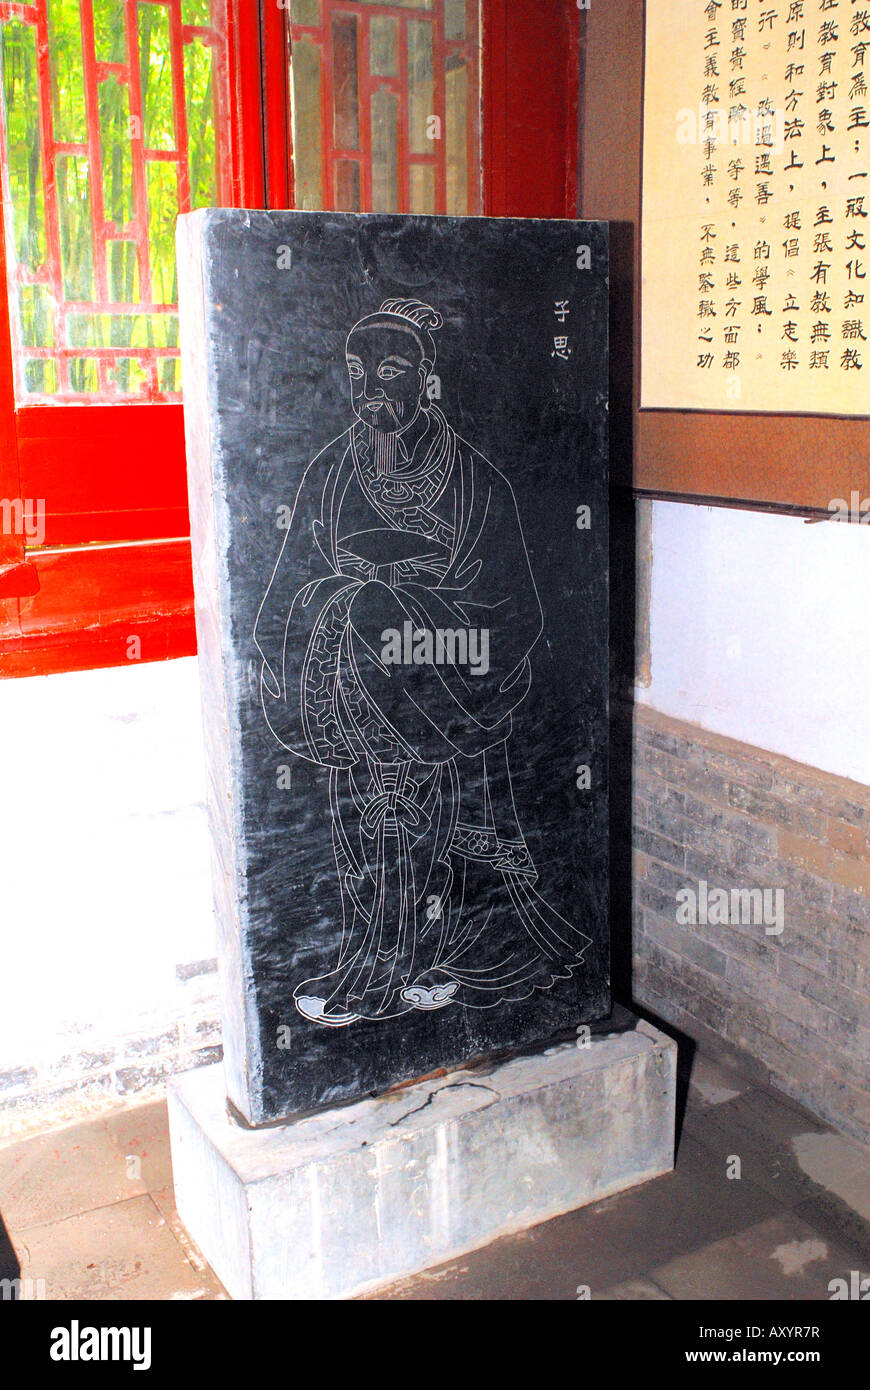 Engraved stele at Songyang Academy Dengfeng Henan Province China Asia Songyang Academy Built Northern Wei Dynasty in A D Stock Photo